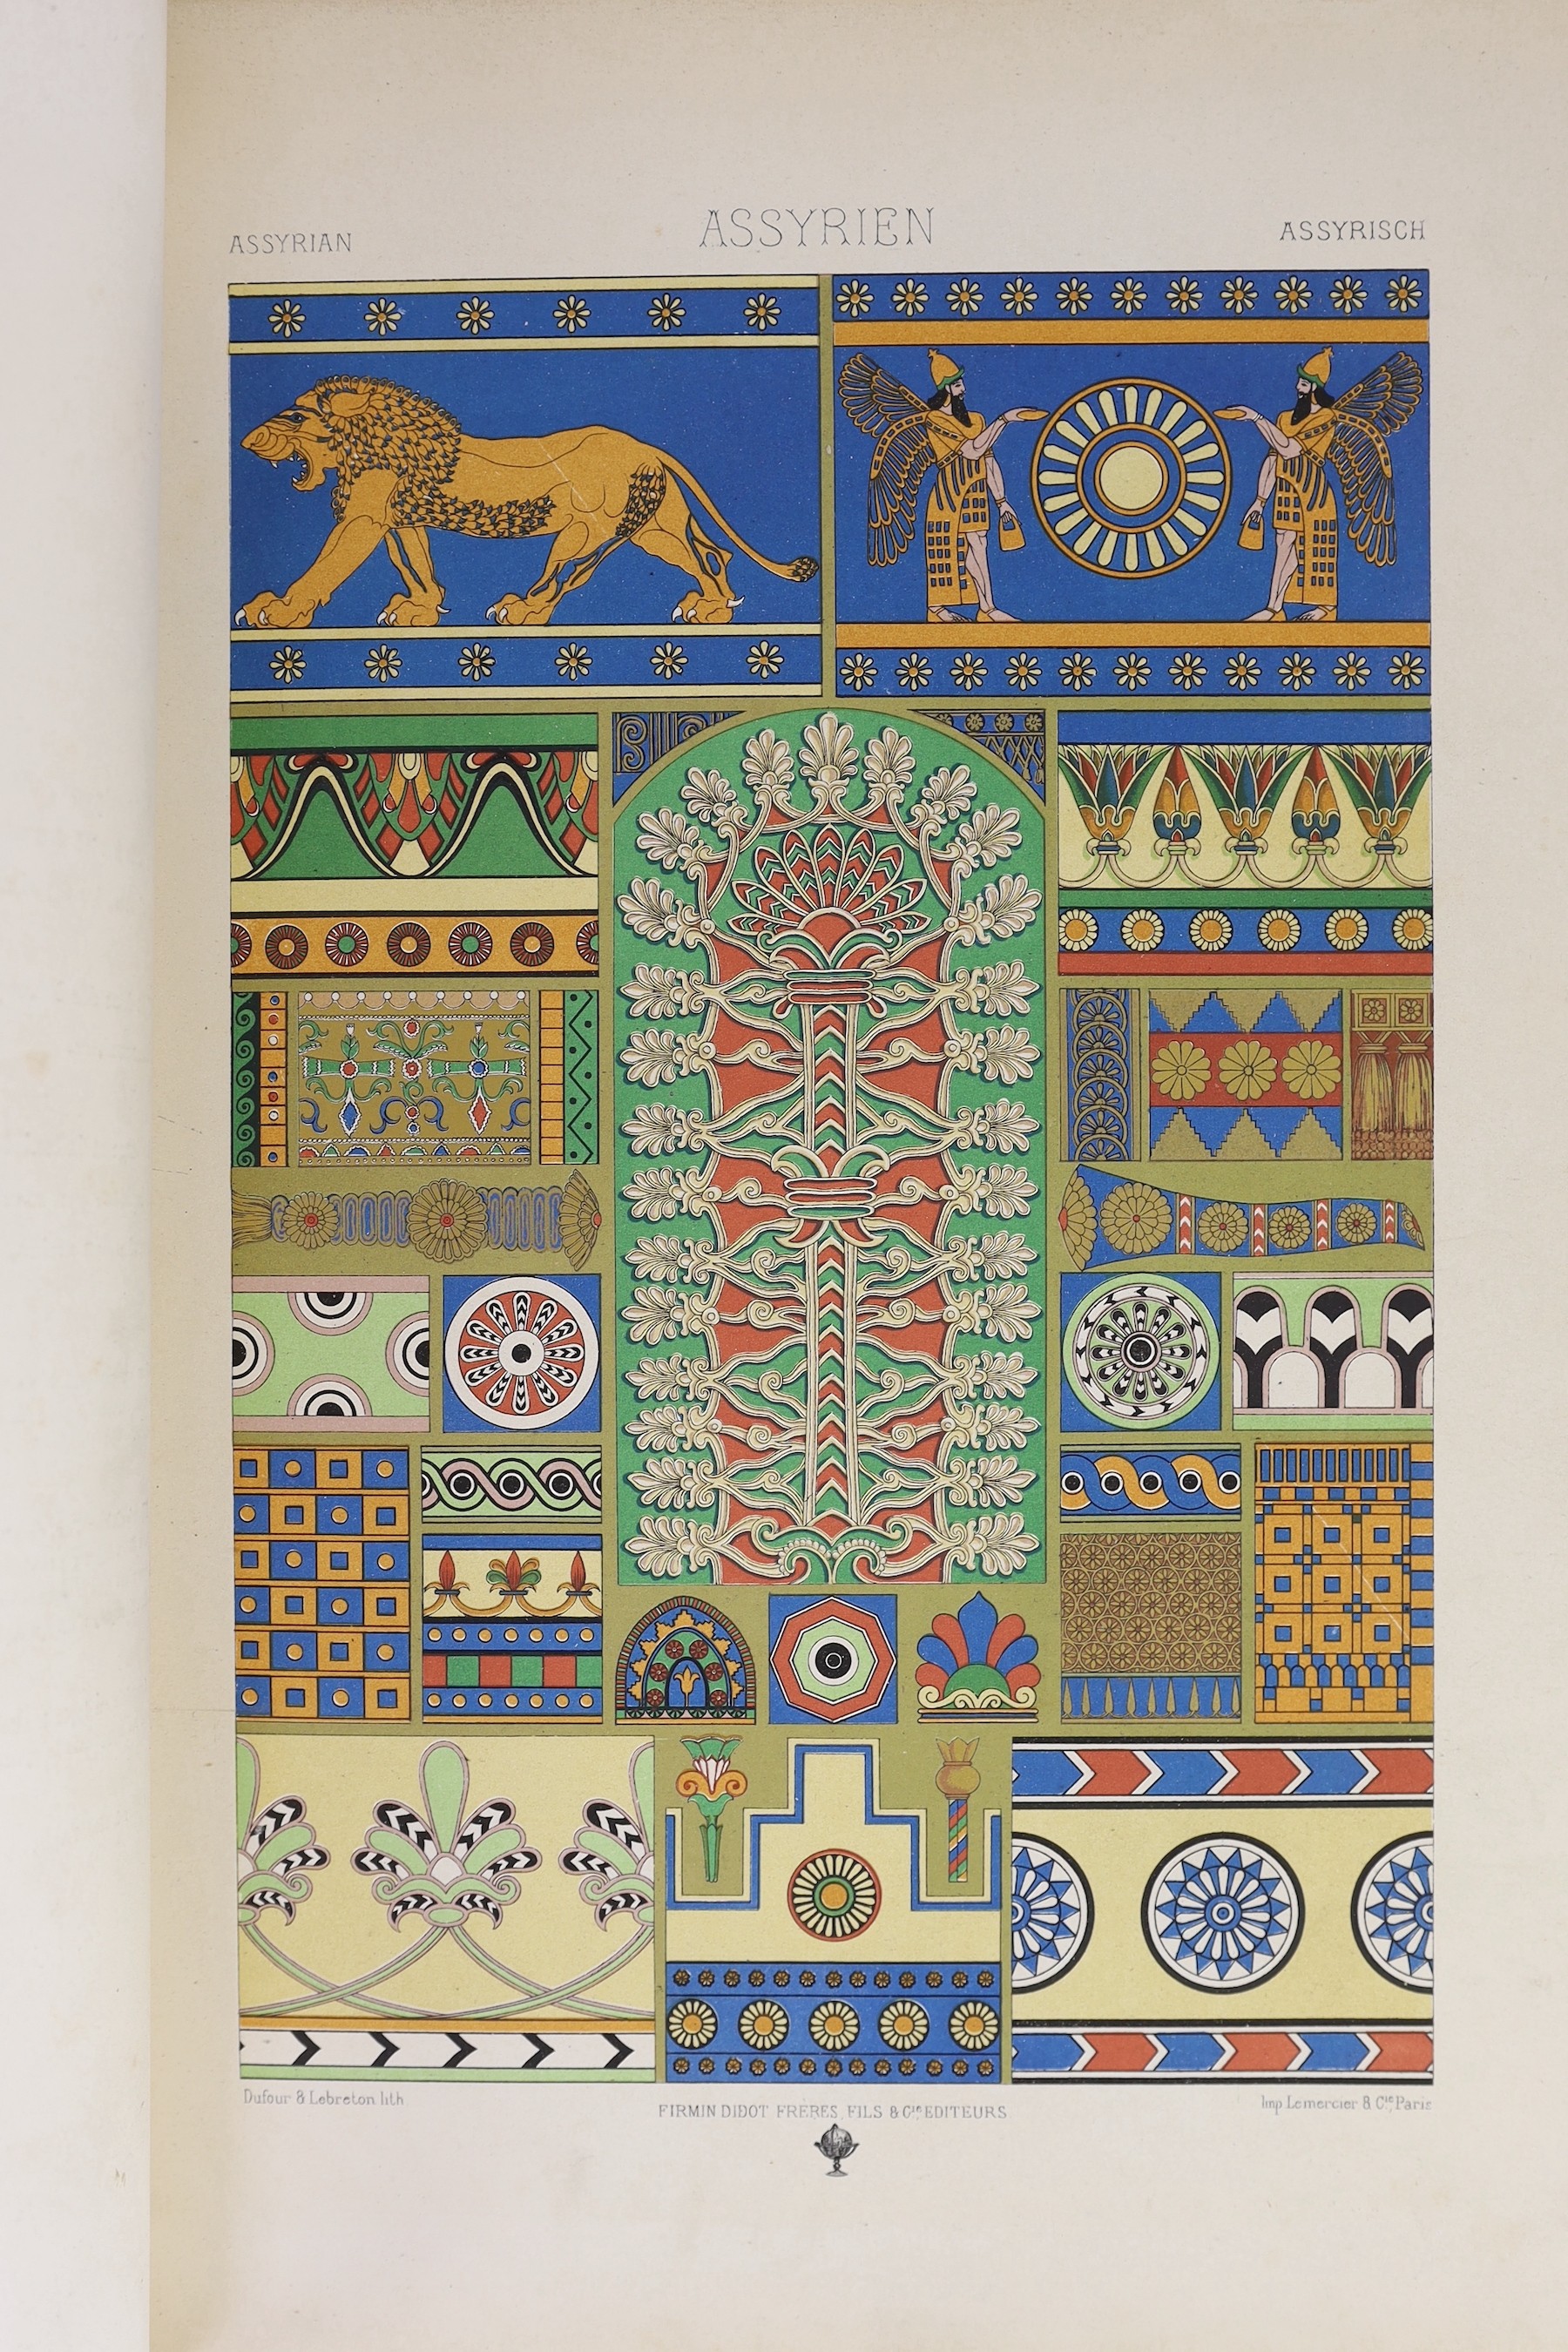 Racinet, Auguste - L’Ornement Polychrome, folio, rebound half blue morocco, with 100 chromolithograph plates, cloth front panel mounted with later title, Paris, [c. 1870]